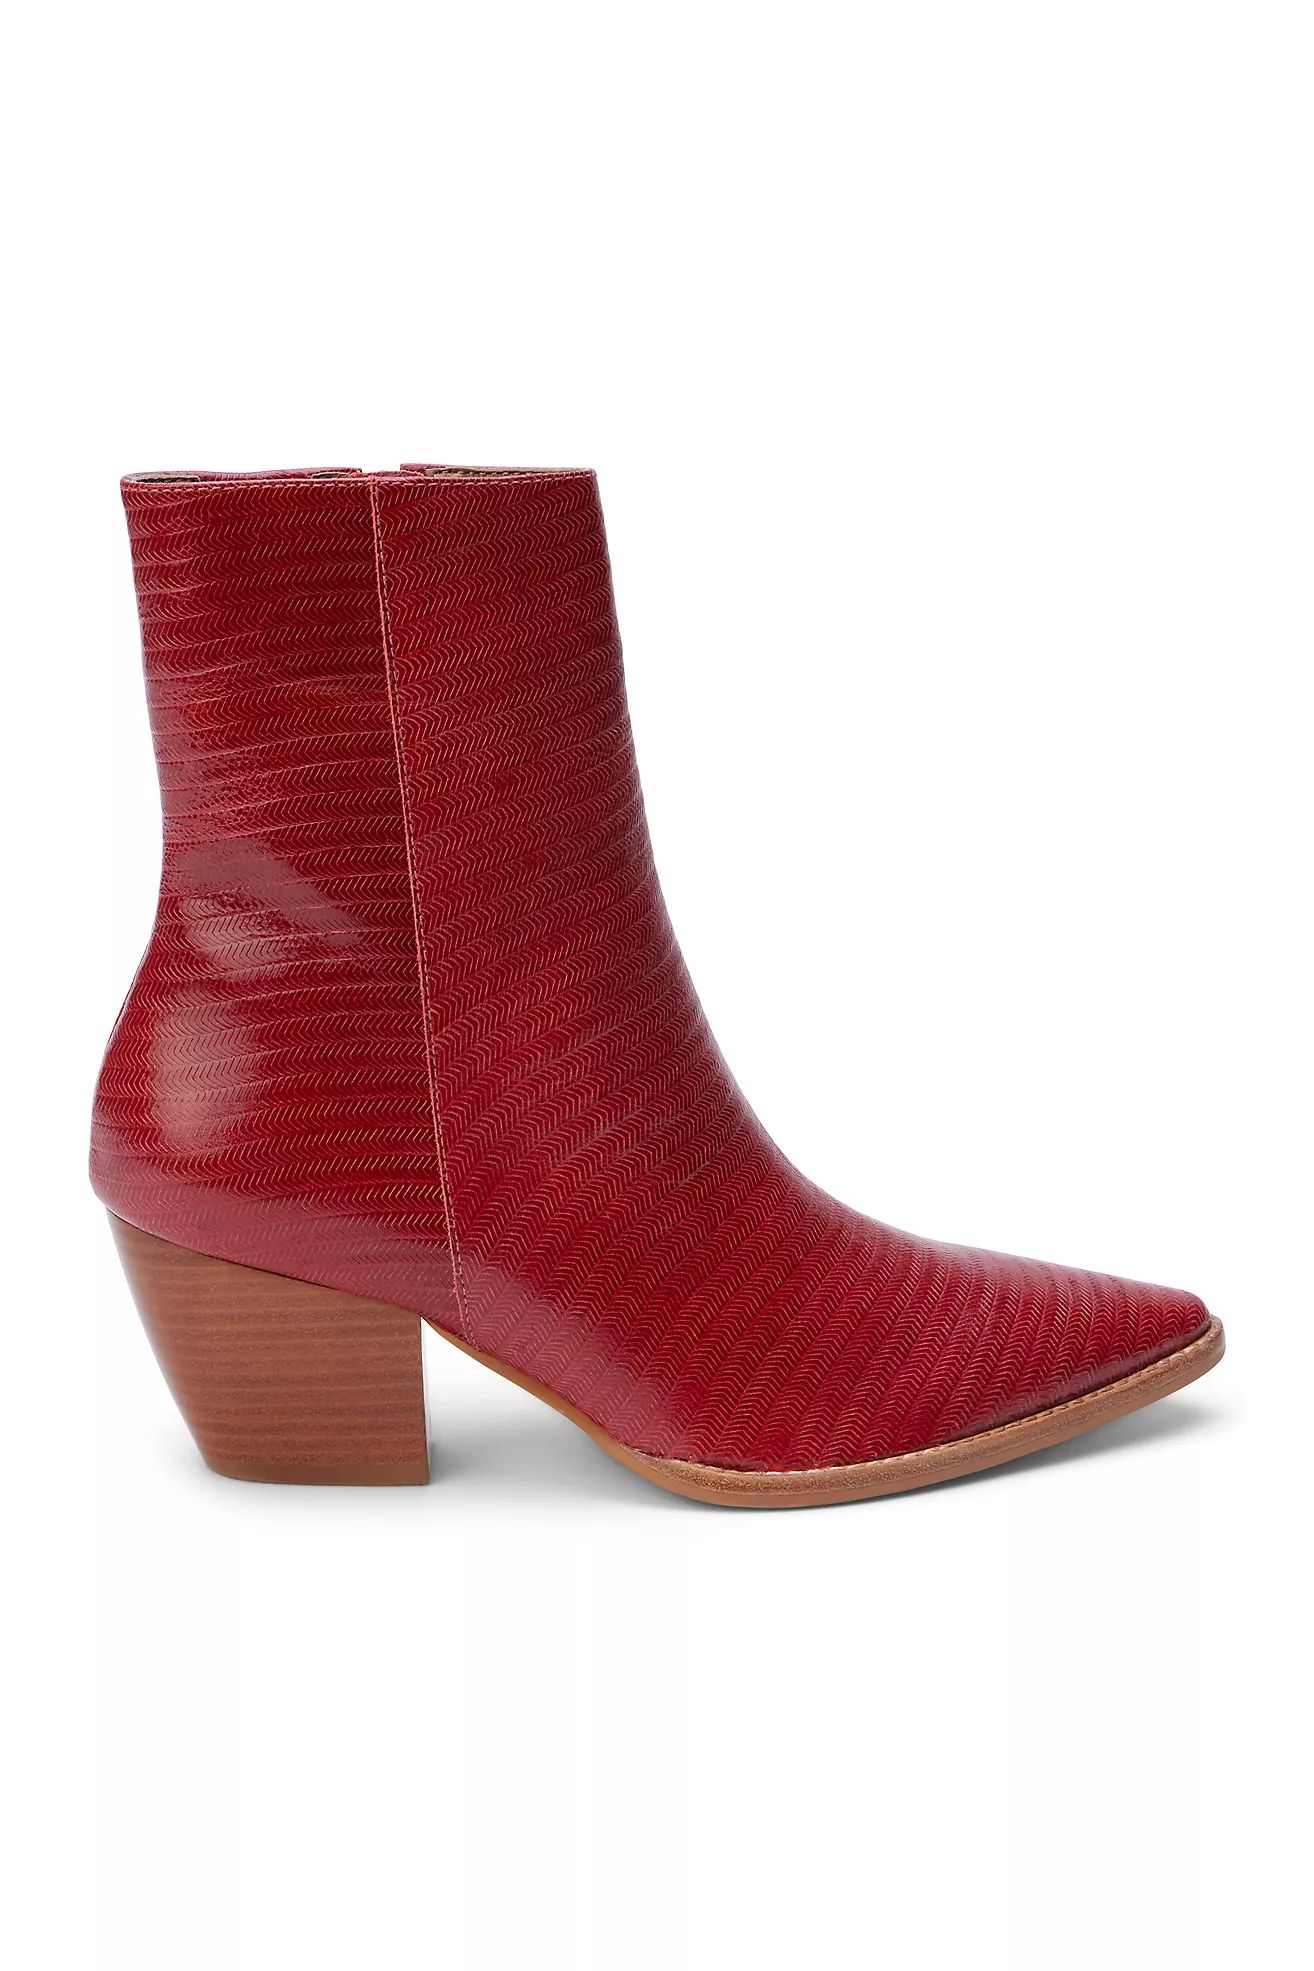 Matisse Caty Boots | Anthropologie (US)